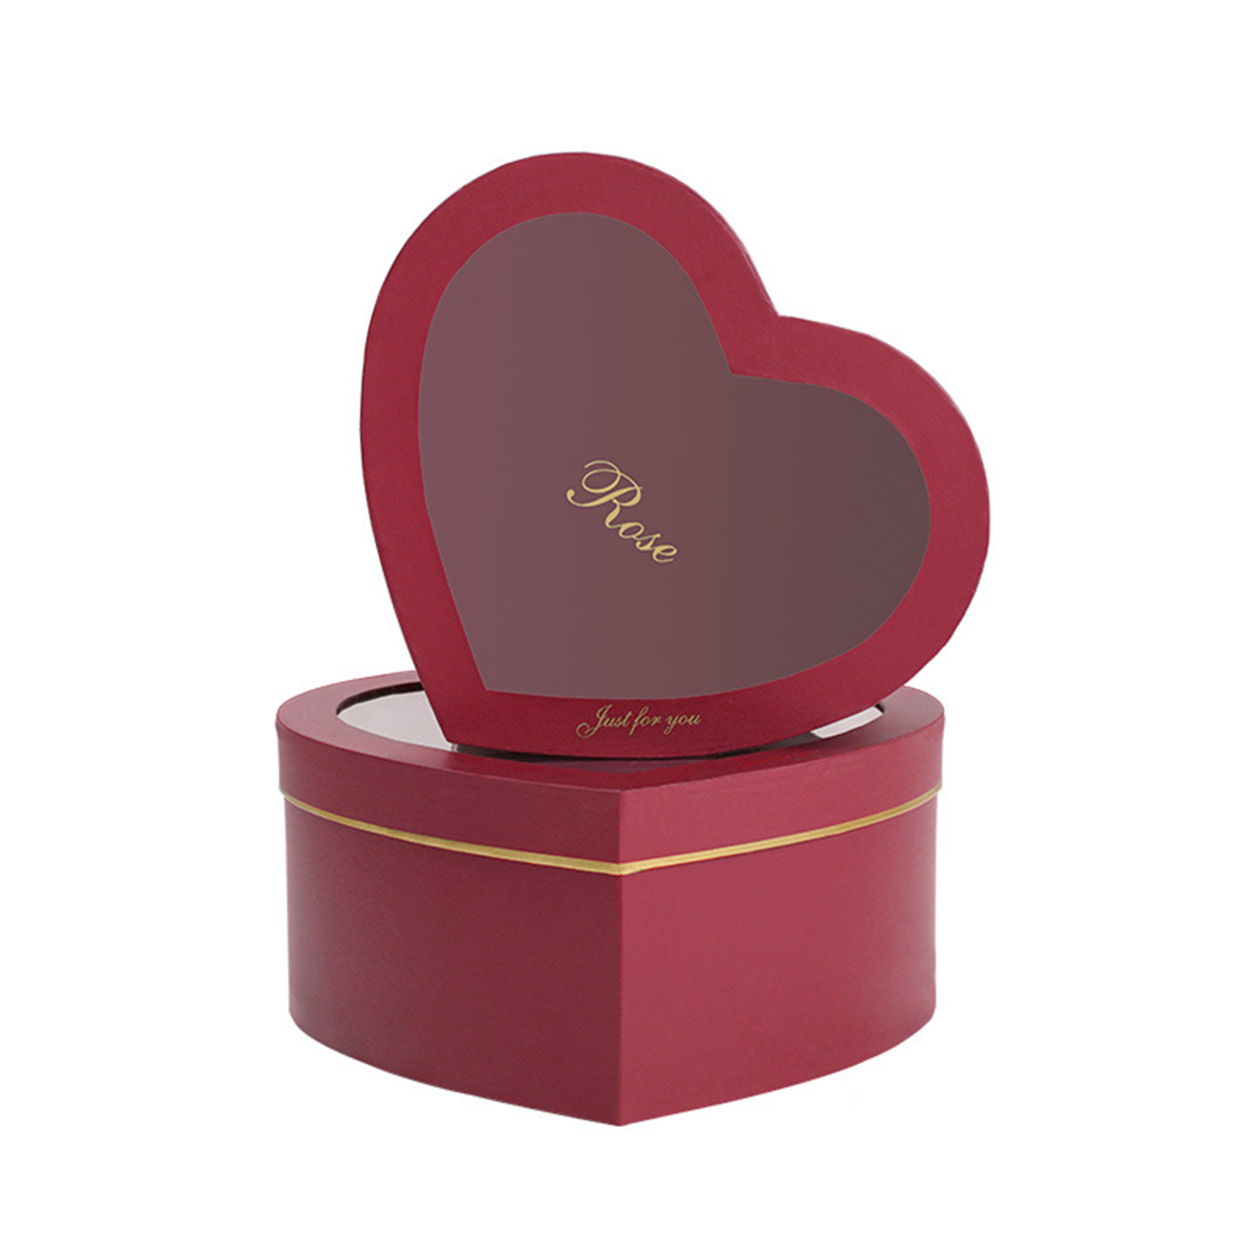 2Pcs/Set Flower Box Heart Shaped Hot Stamping Paper Florist Packaging Rose Gift Case for Party - wine red